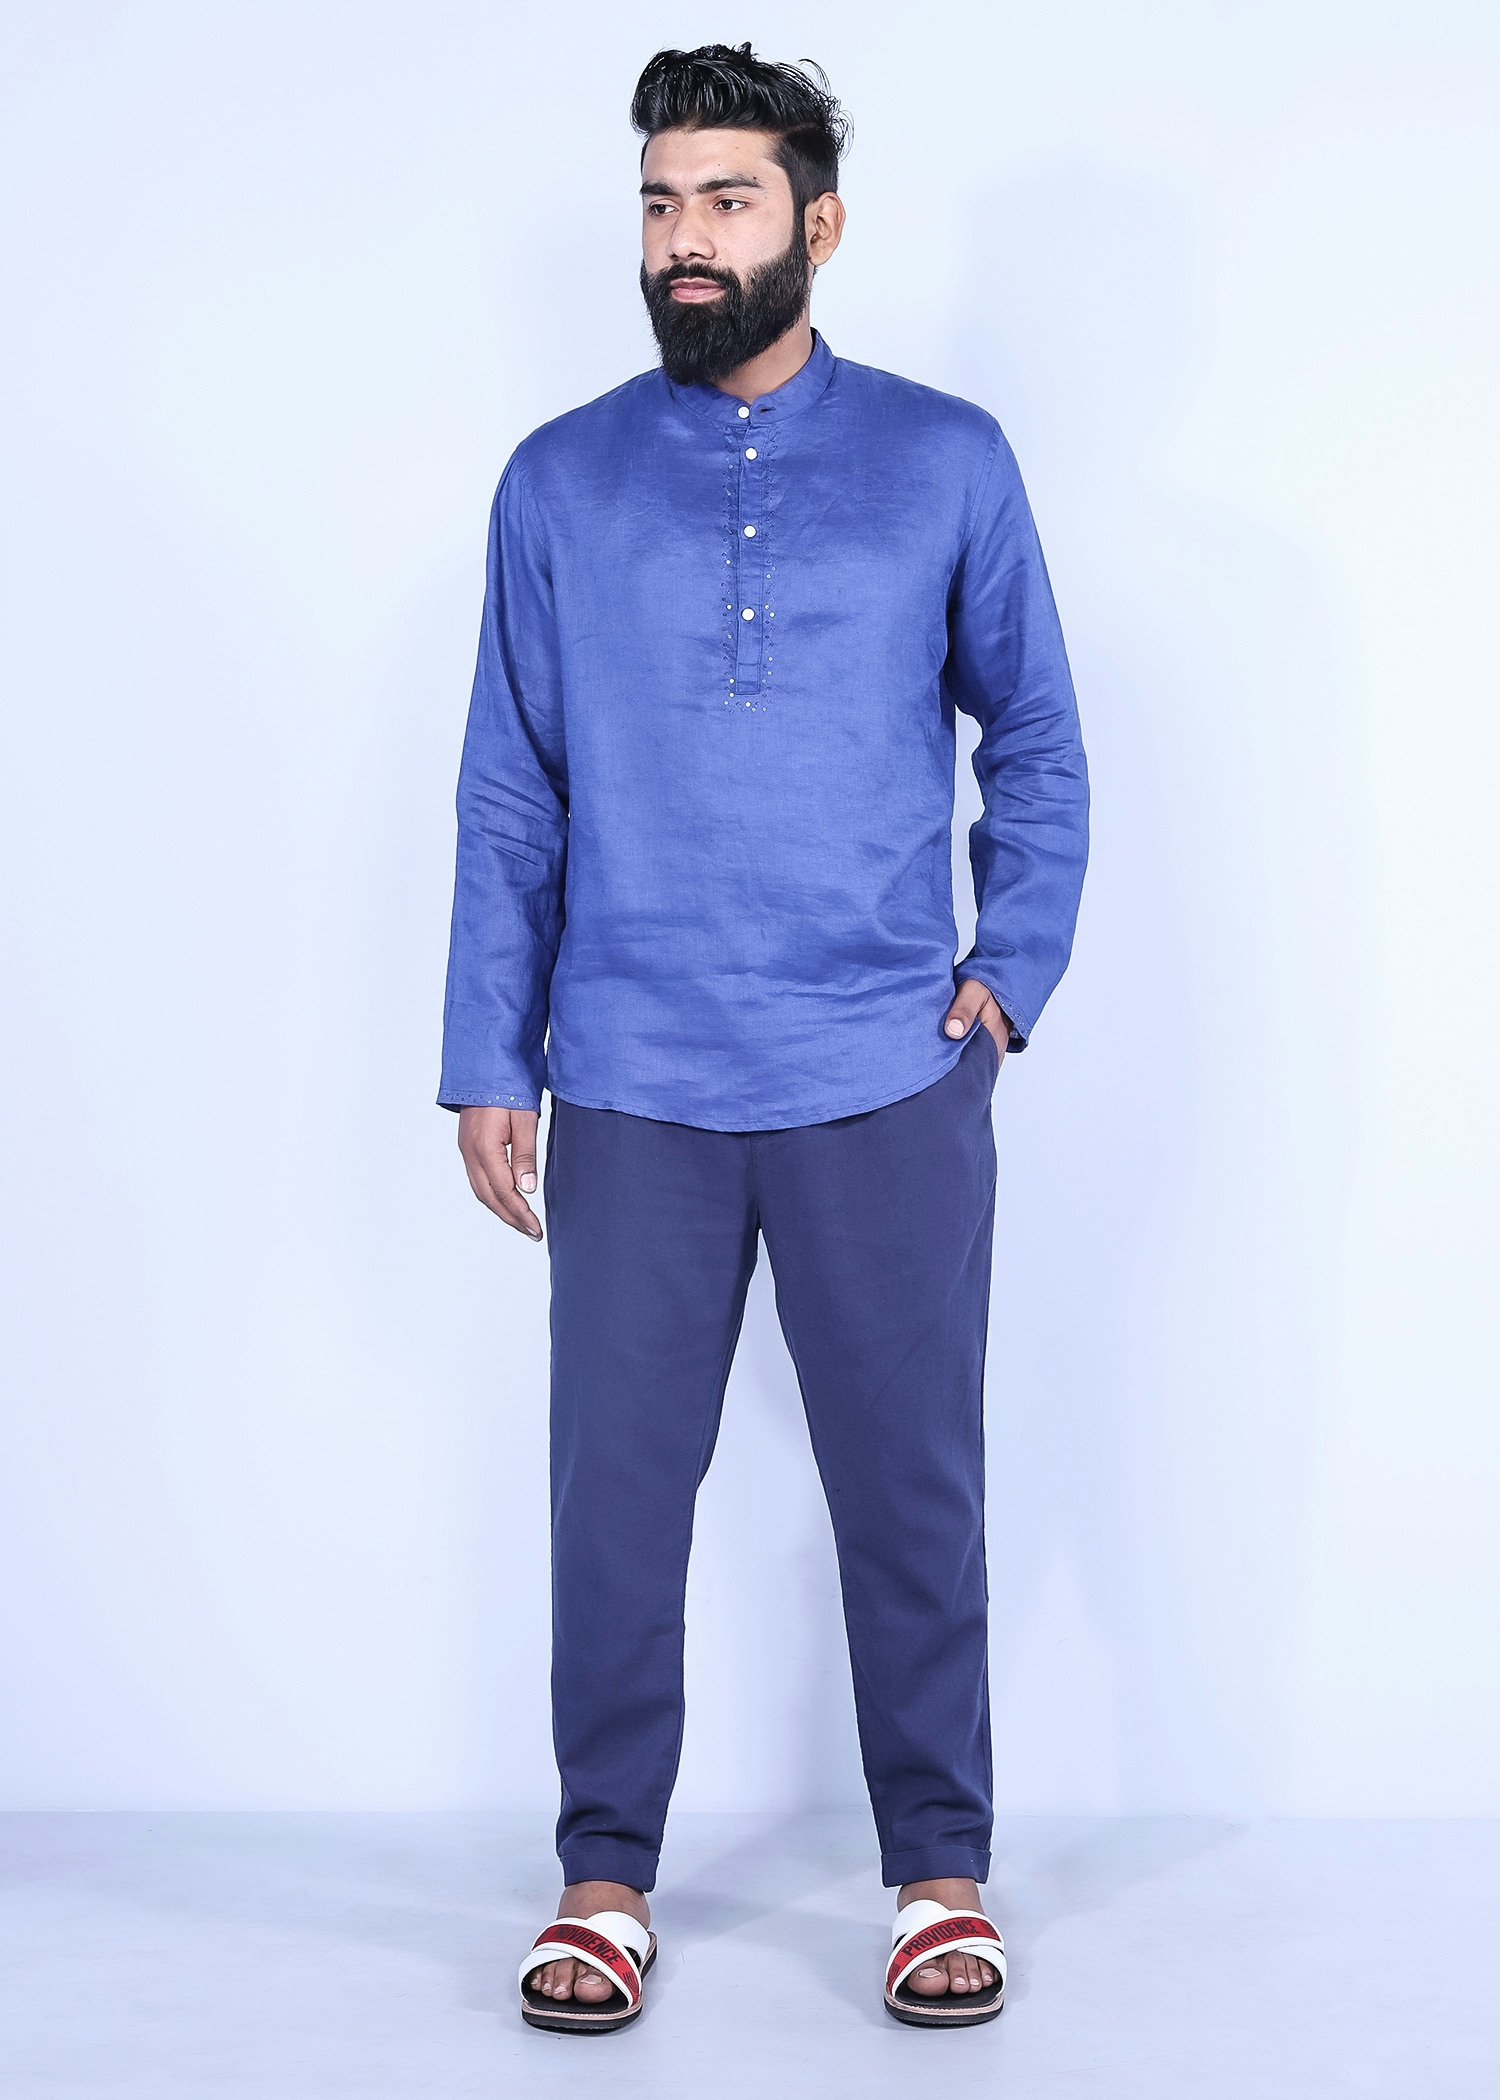 heron ii trouser navy color full front view